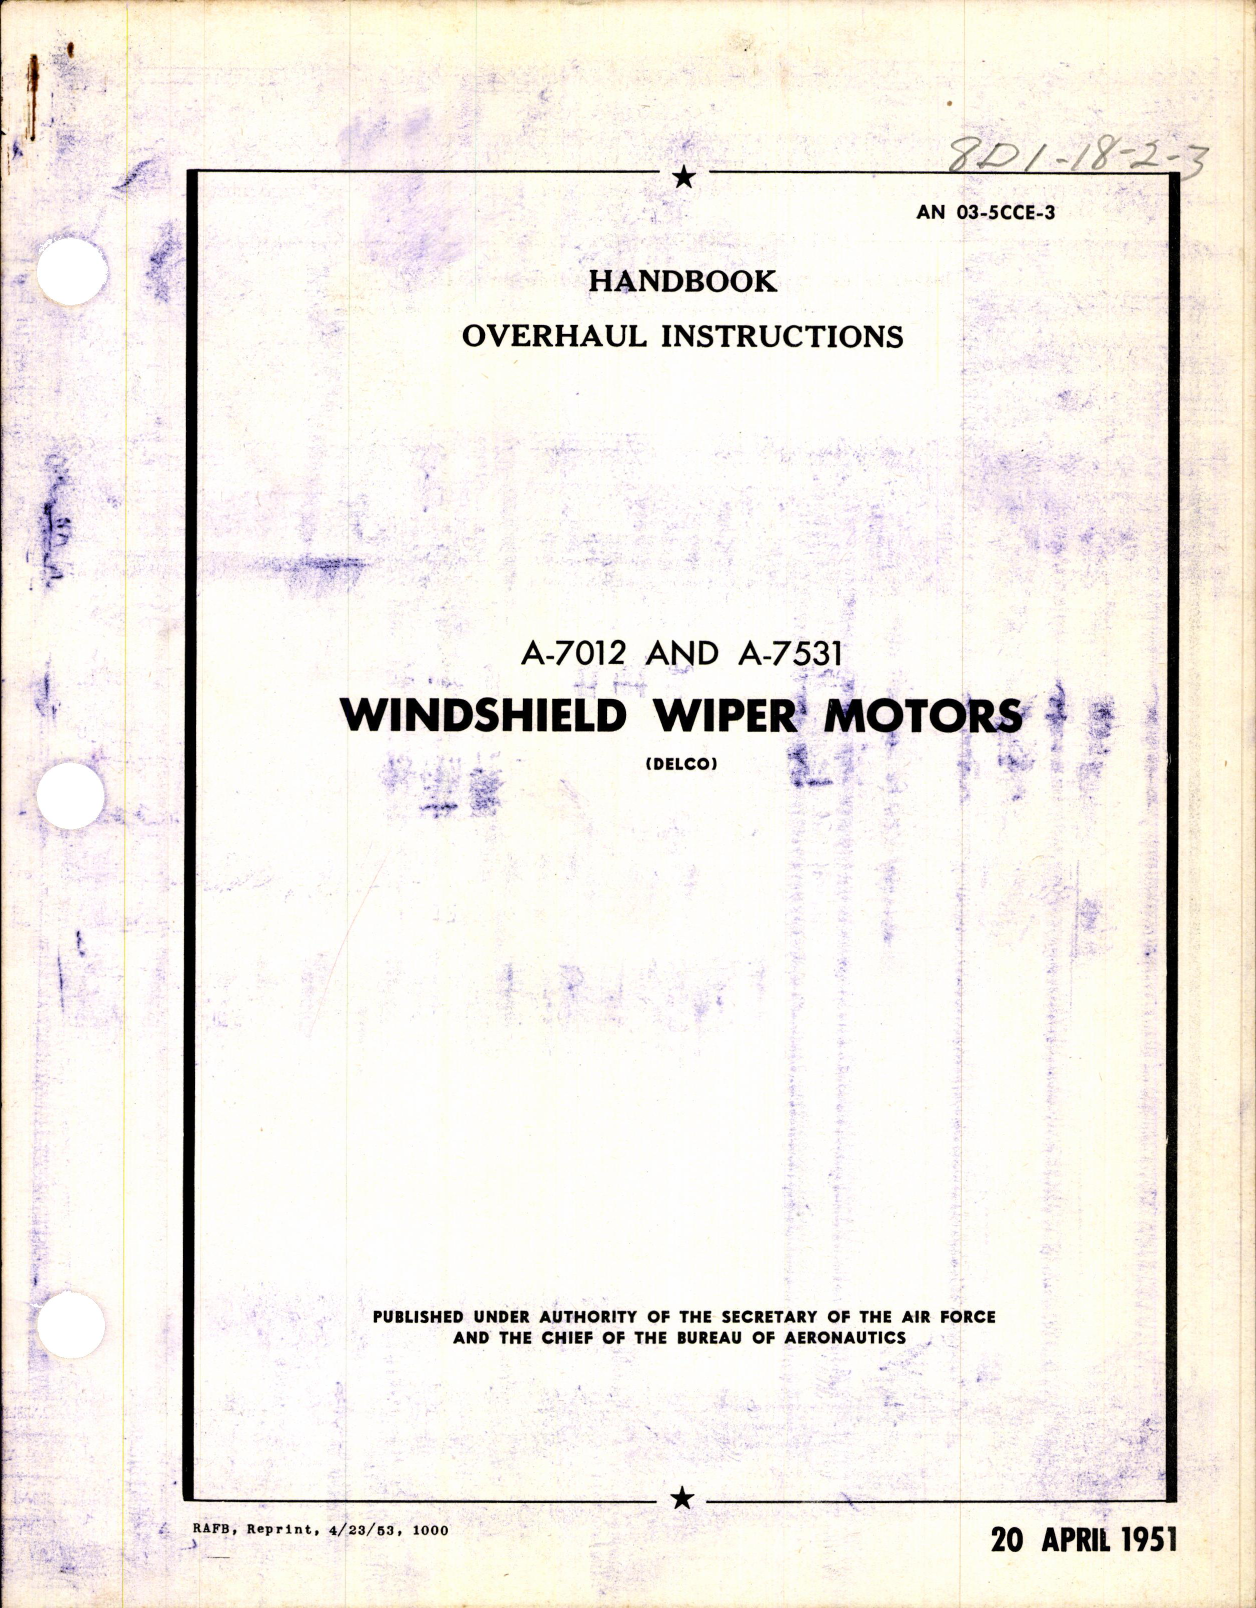 Sample page 1 from AirCorps Library document: Overhaul Instructions for A-7012 and A-7531 Windshield Wiper Motors